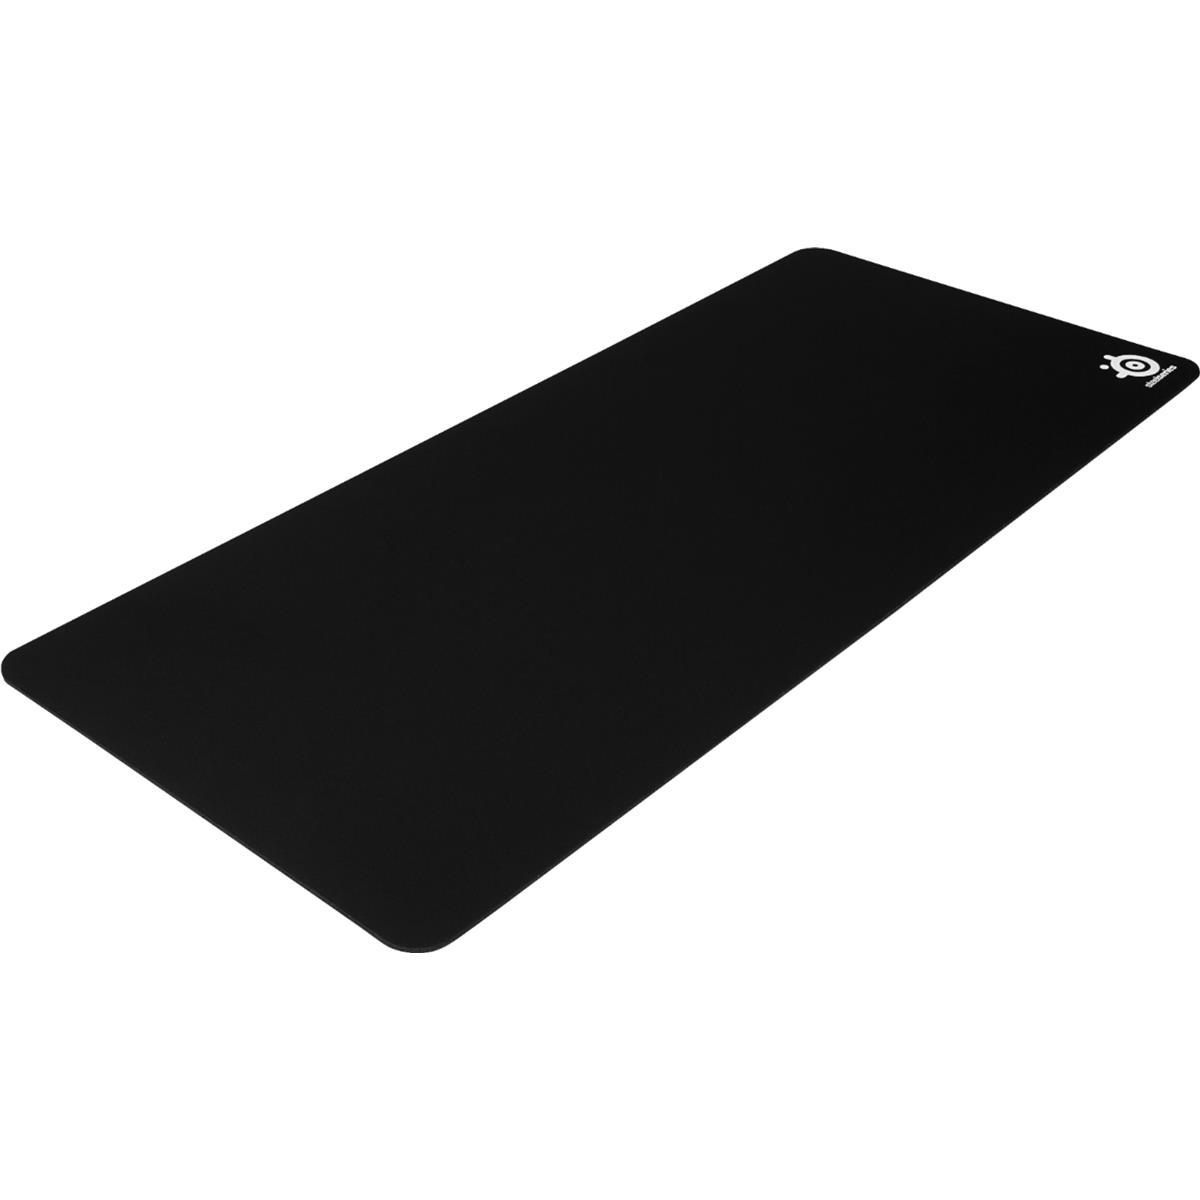 Image of SteelSeries QcK Cloth Gaming Mouse Pad